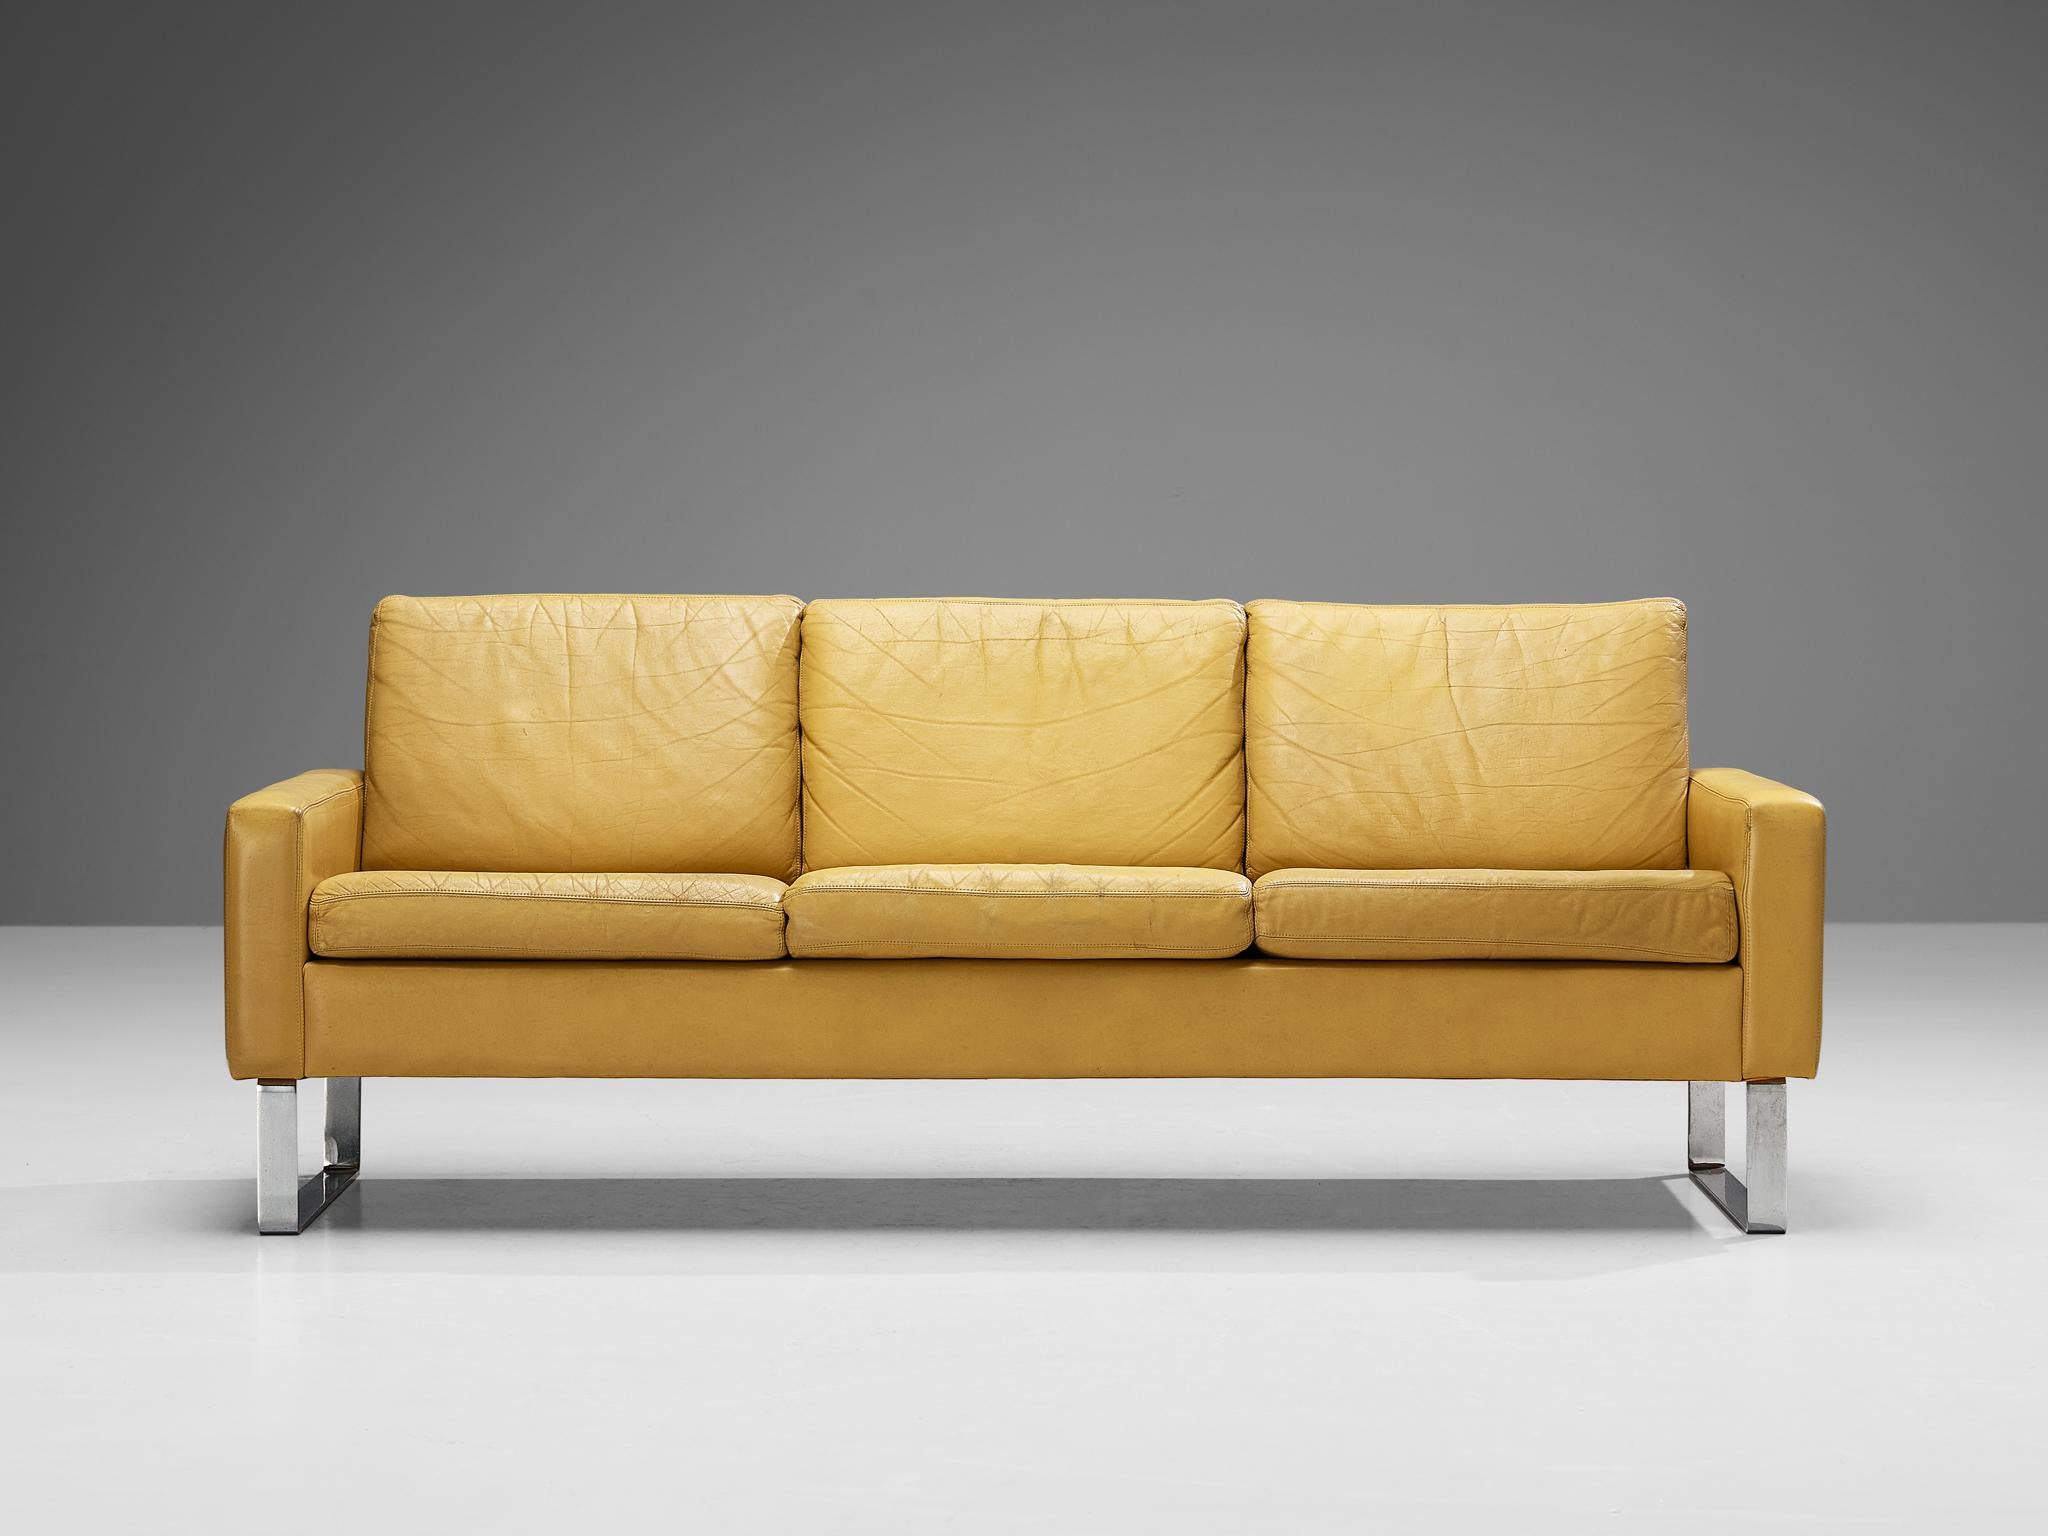 Sofa, leather, chrome-plated steel, Germany, 1960s

This streamlined sofa has a simple look, yet the combination of materials and the defined geometry of this piece, this sofa radiates grace and style. Marked by clear angular lines, the body is